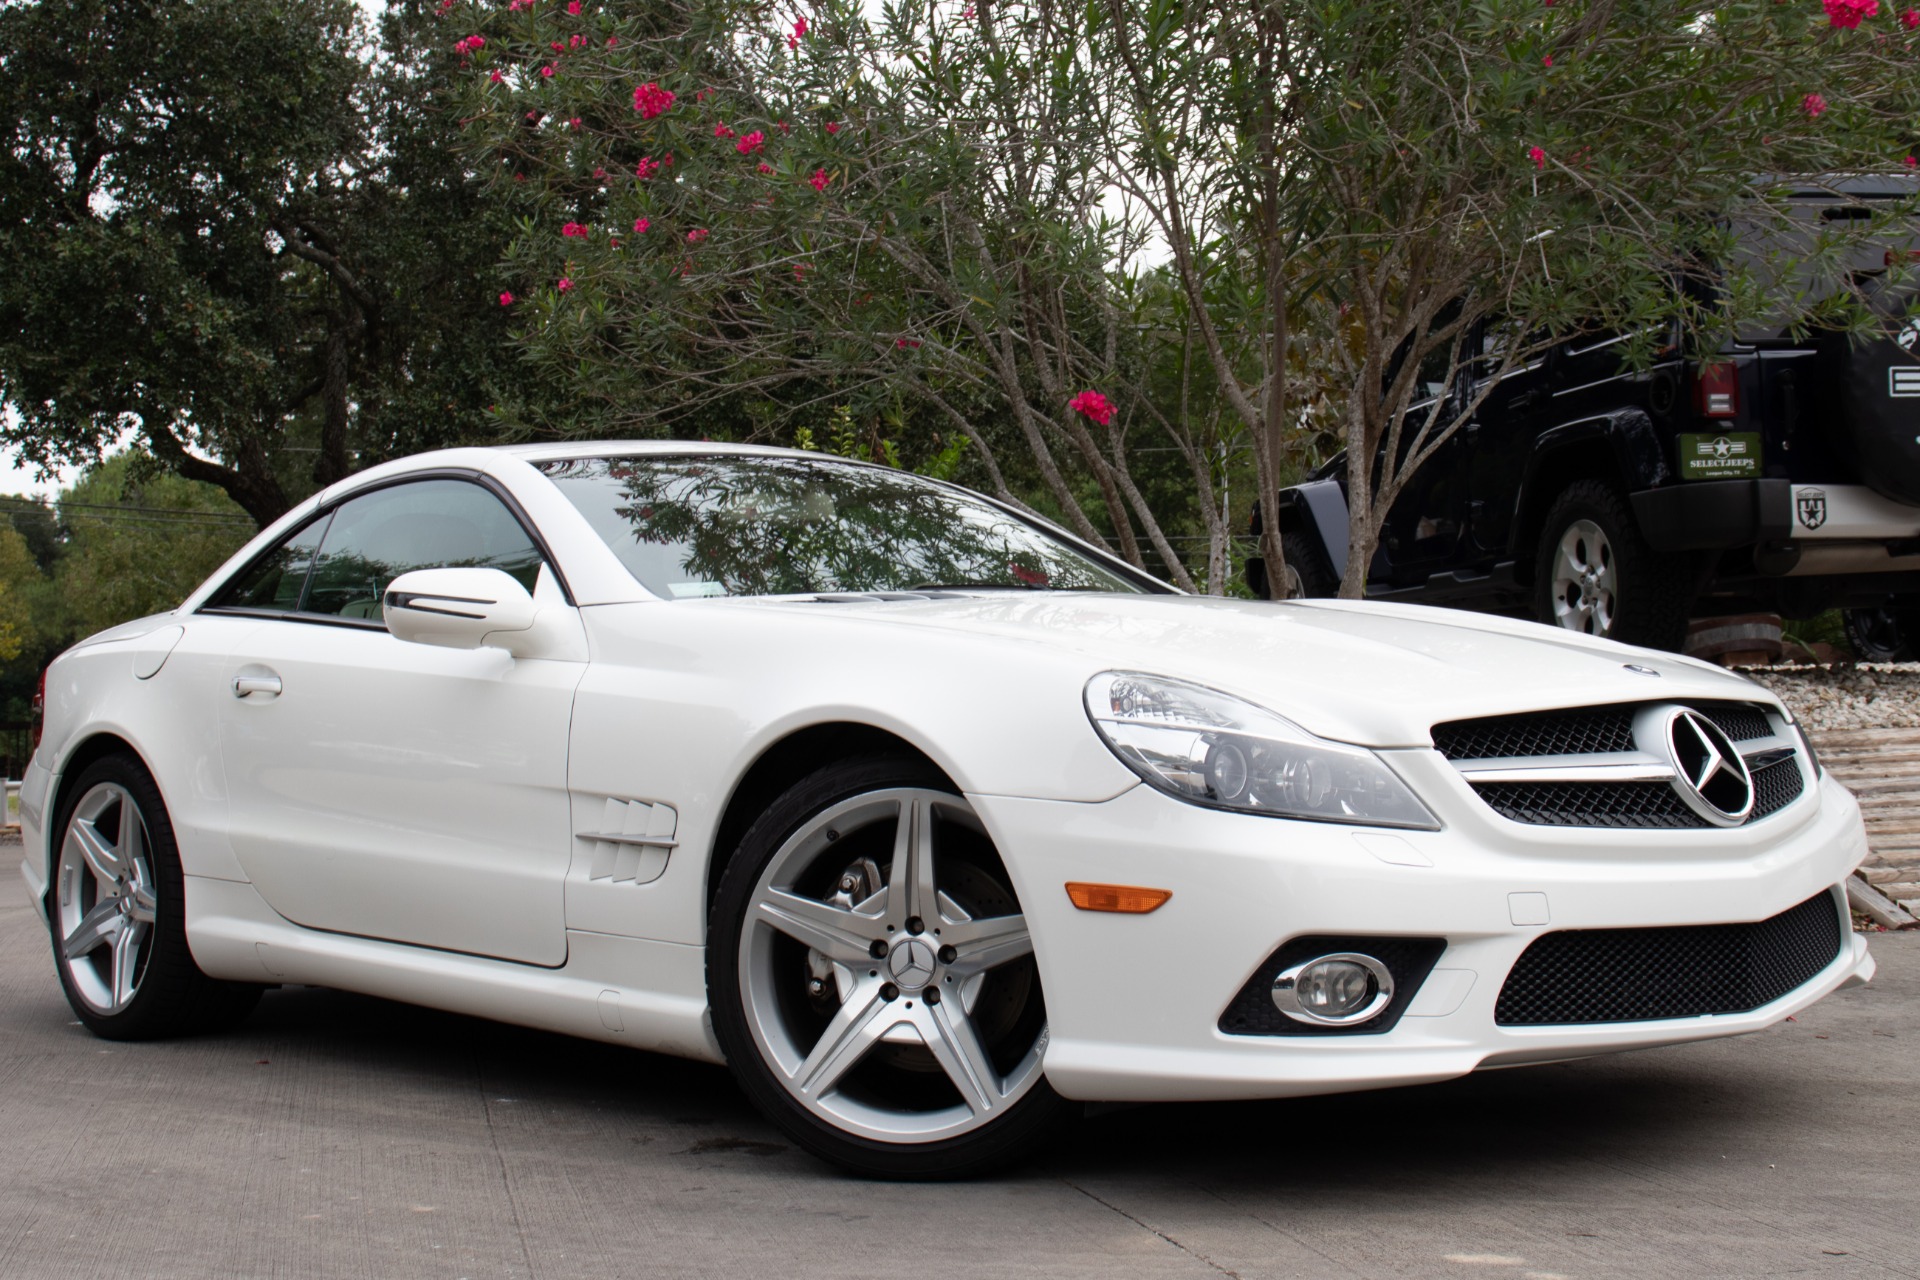 Used 2009 Mercedes-Benz SL-Class SL 550 For Sale ($23,995) | Select Jeeps  Inc. Stock #146843